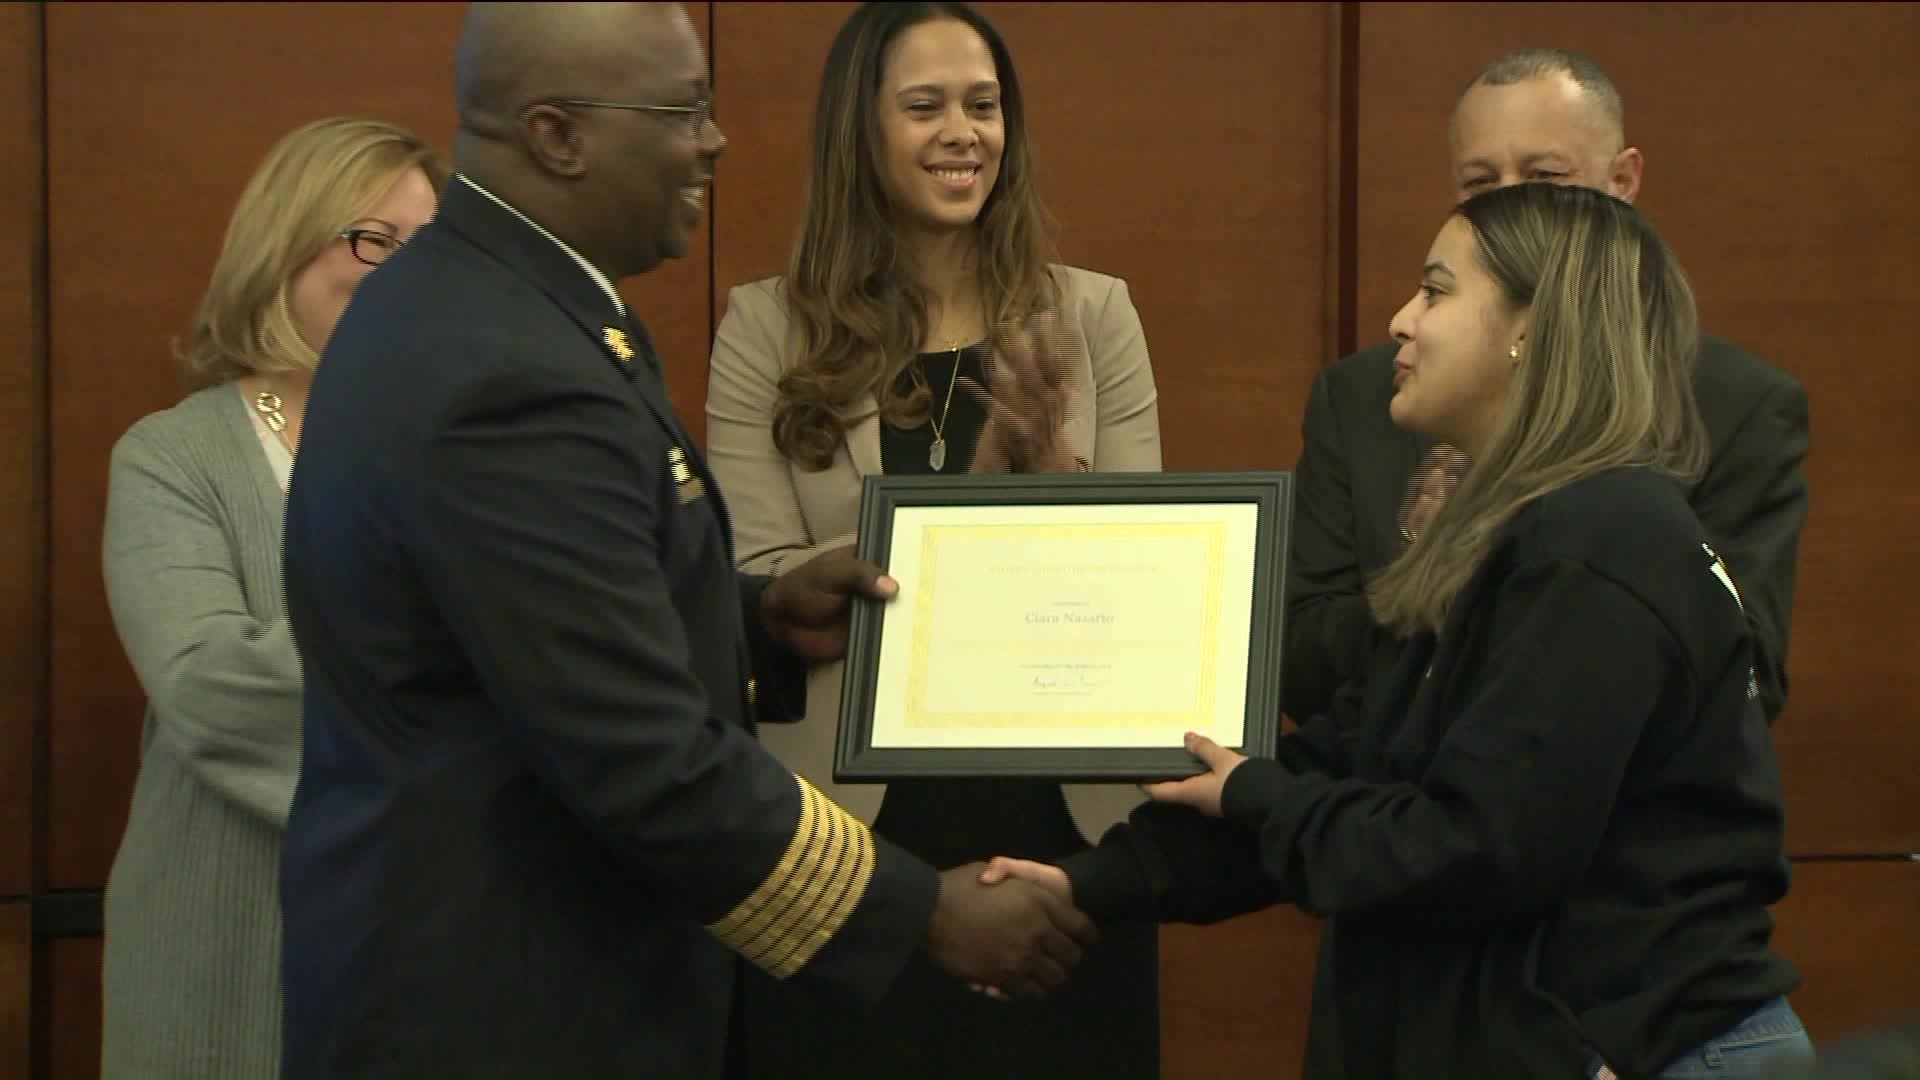 Good Samaritans honored for rescue efforts during Hartford fire